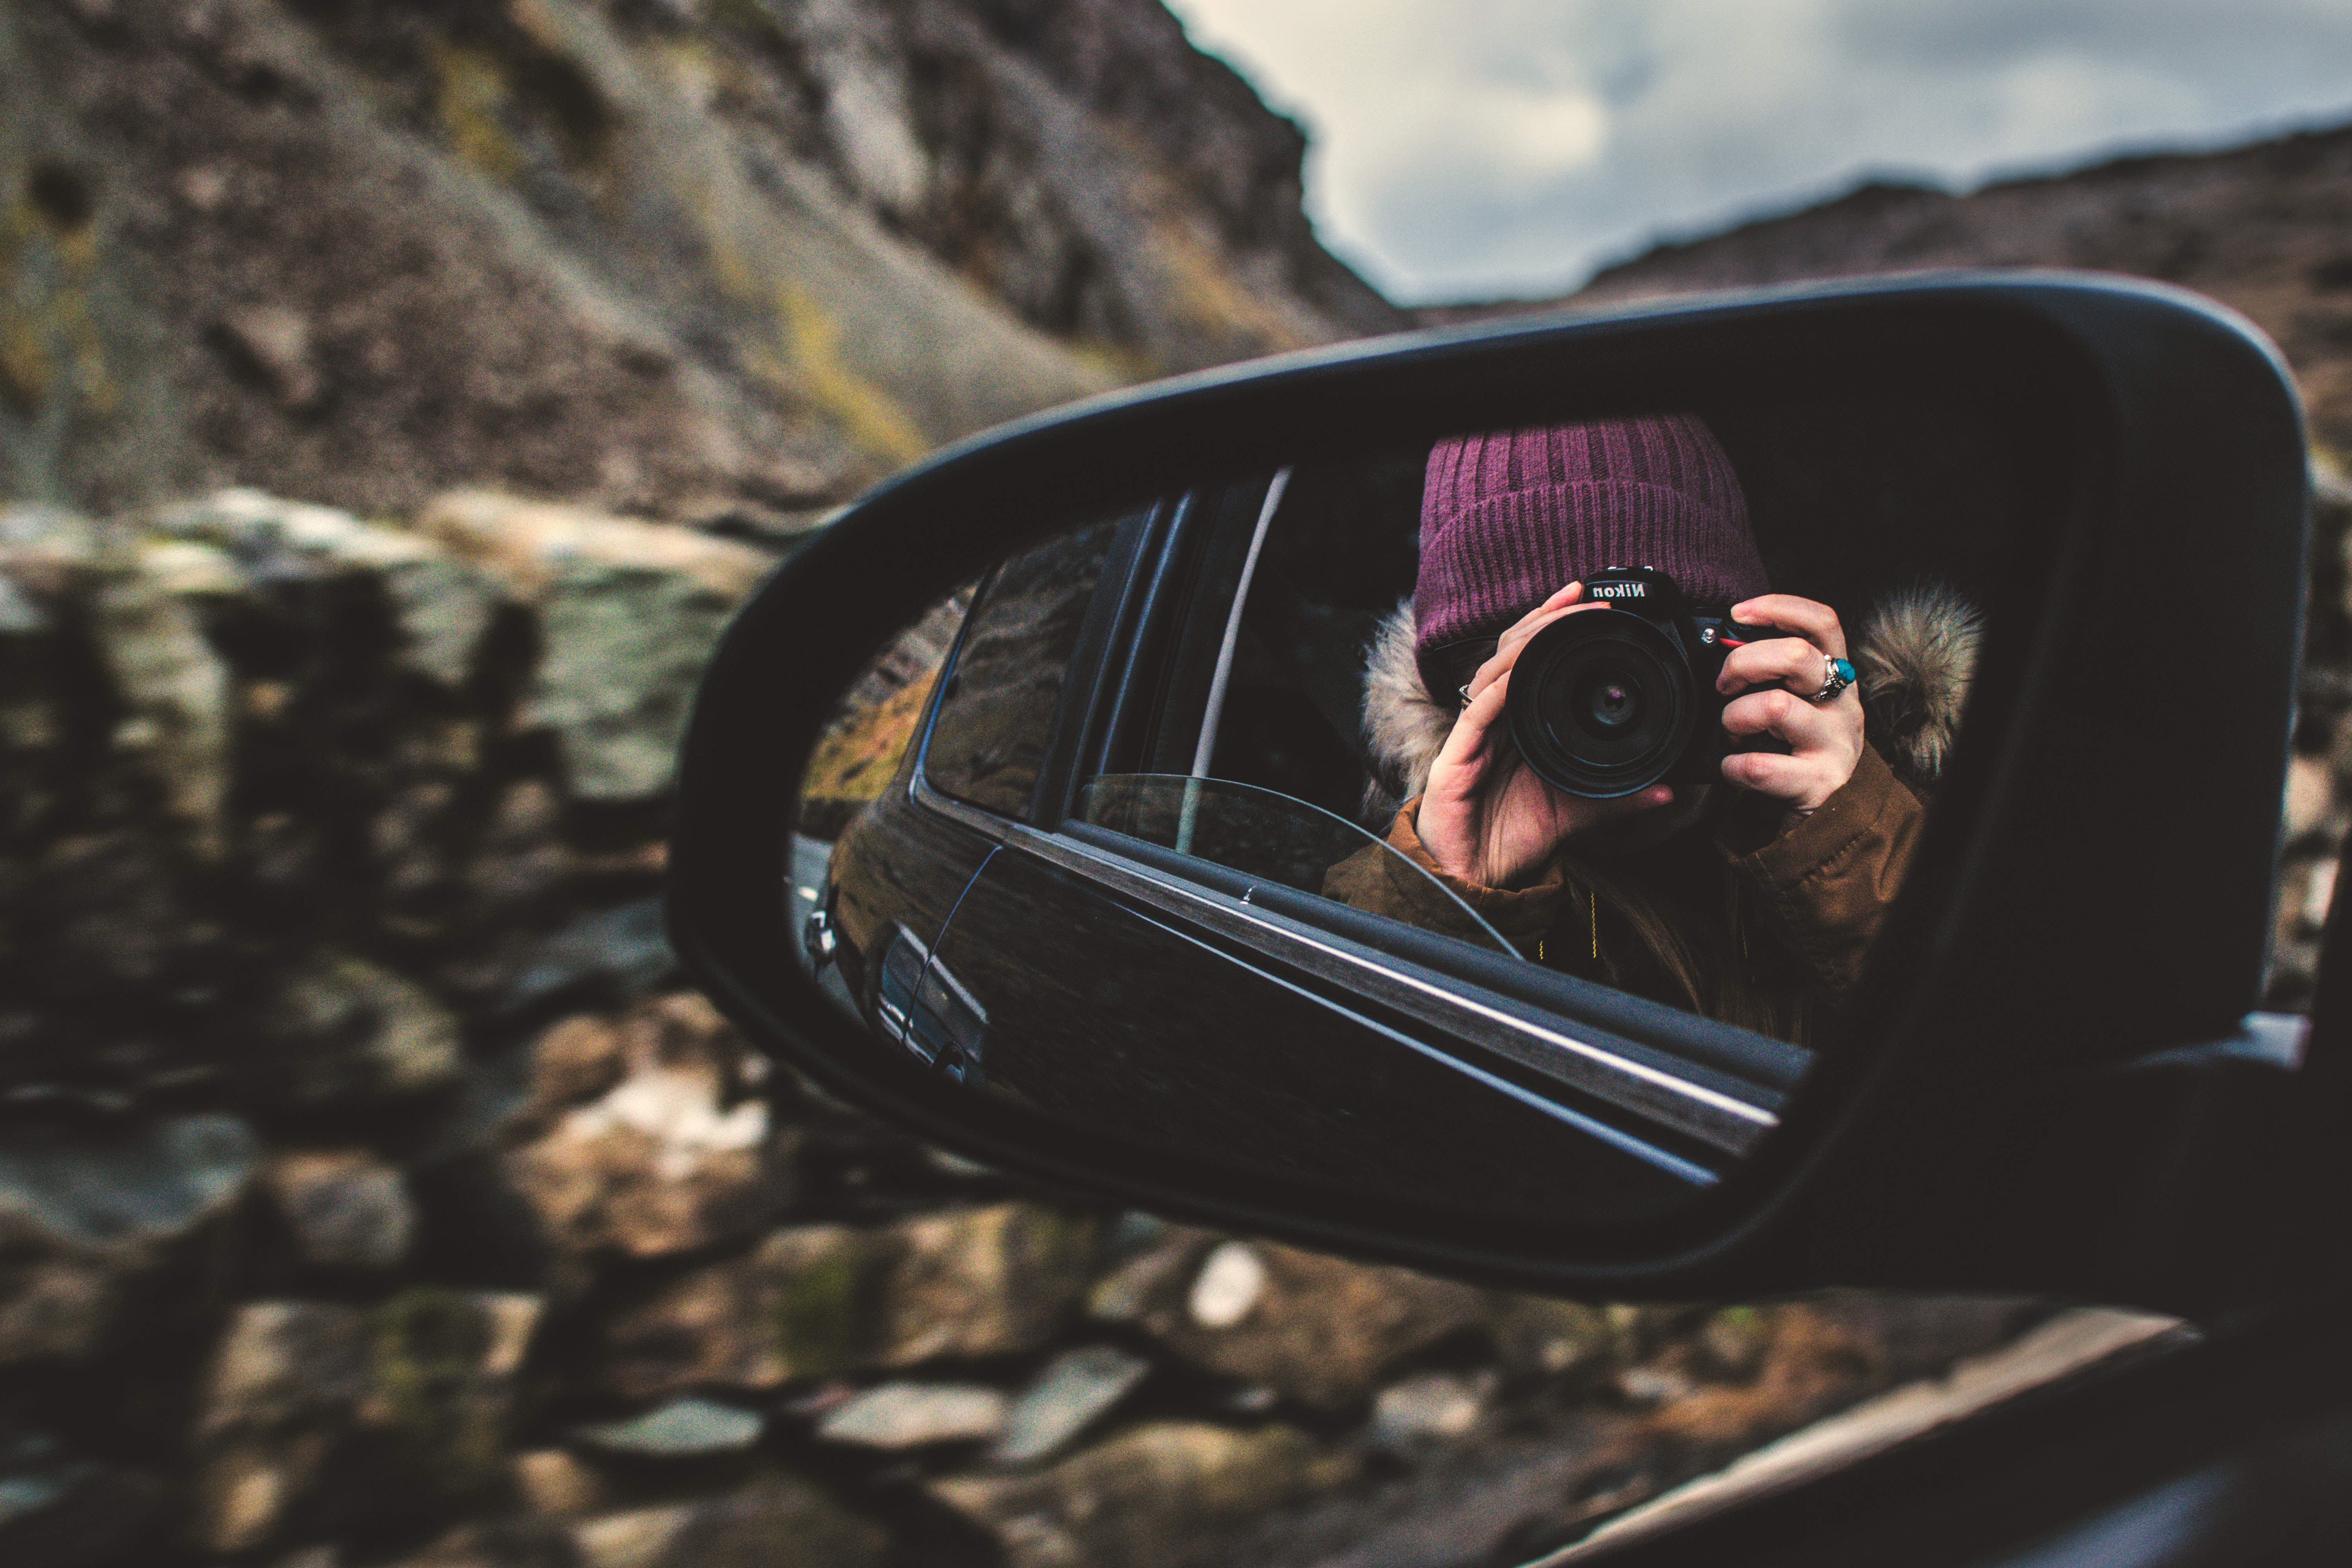 Person Holding Dslr Camera Reflected on Black Framed Wing Mirror, Automobile, Outdoors, Window, Vehicle, HQ Photo